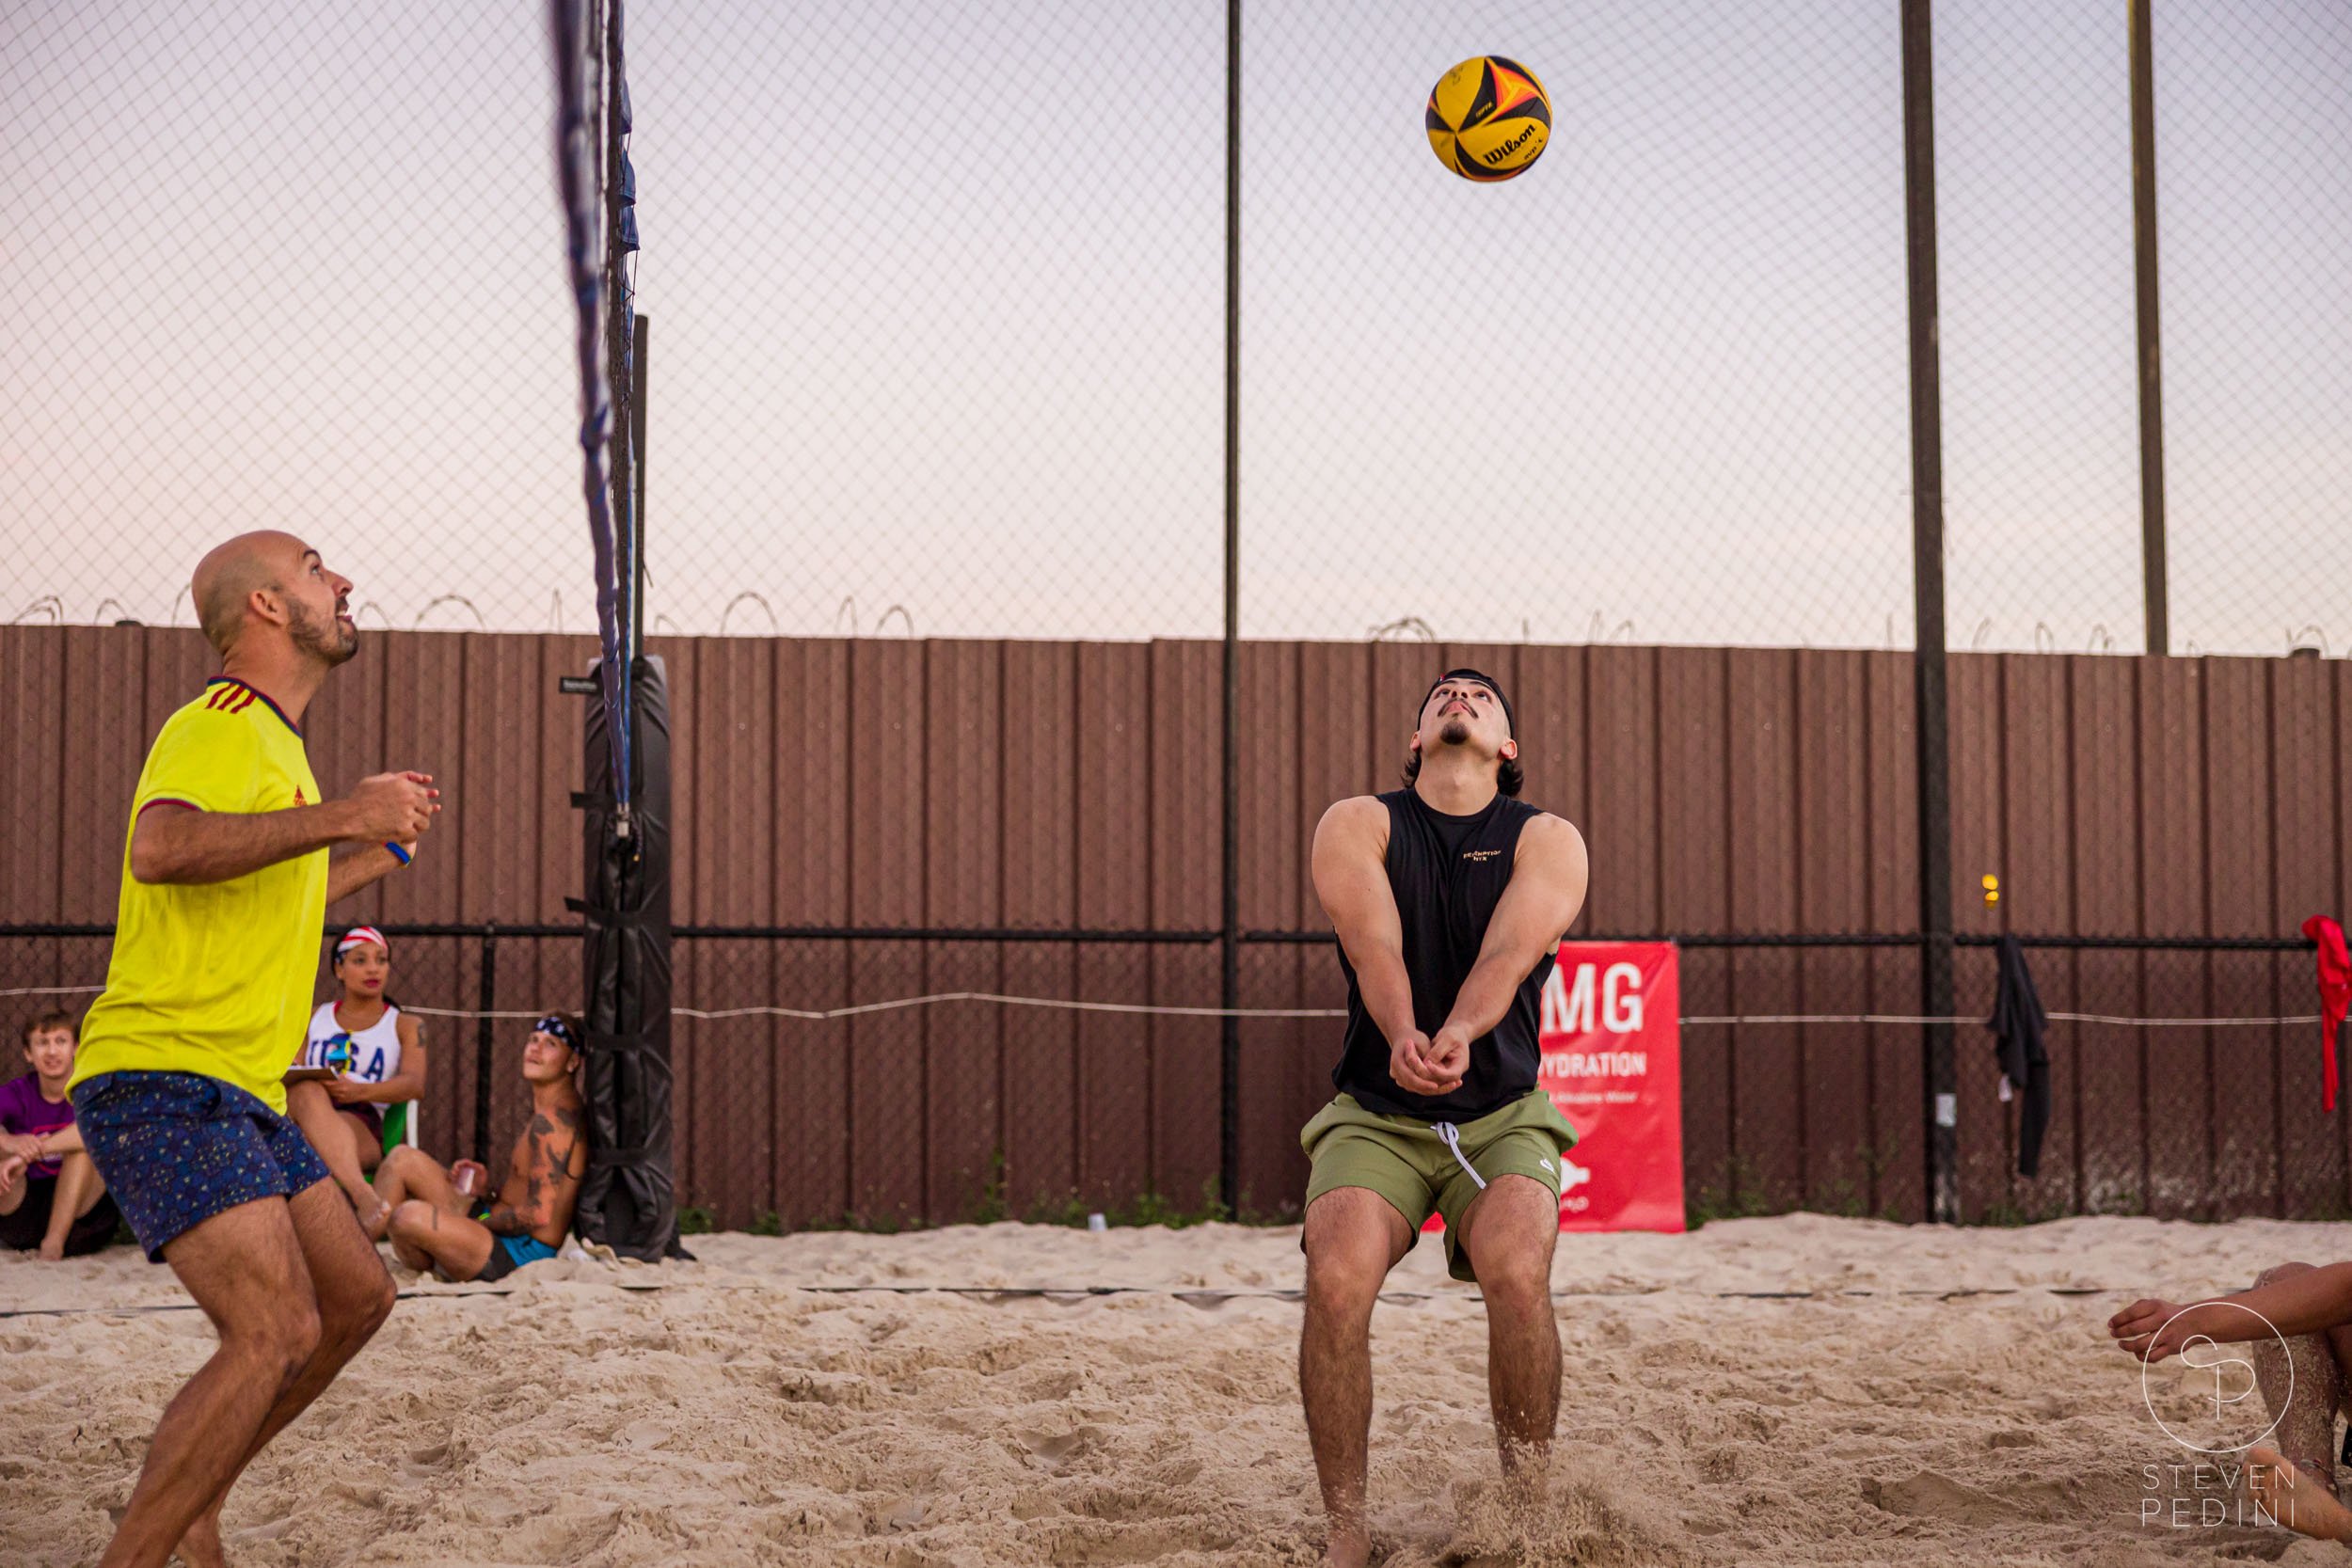 Steven Pedini Photography - Bumpy Pickle - Sand Volleyball - Houston TX - World Cup of Volleyball - 00252.jpg